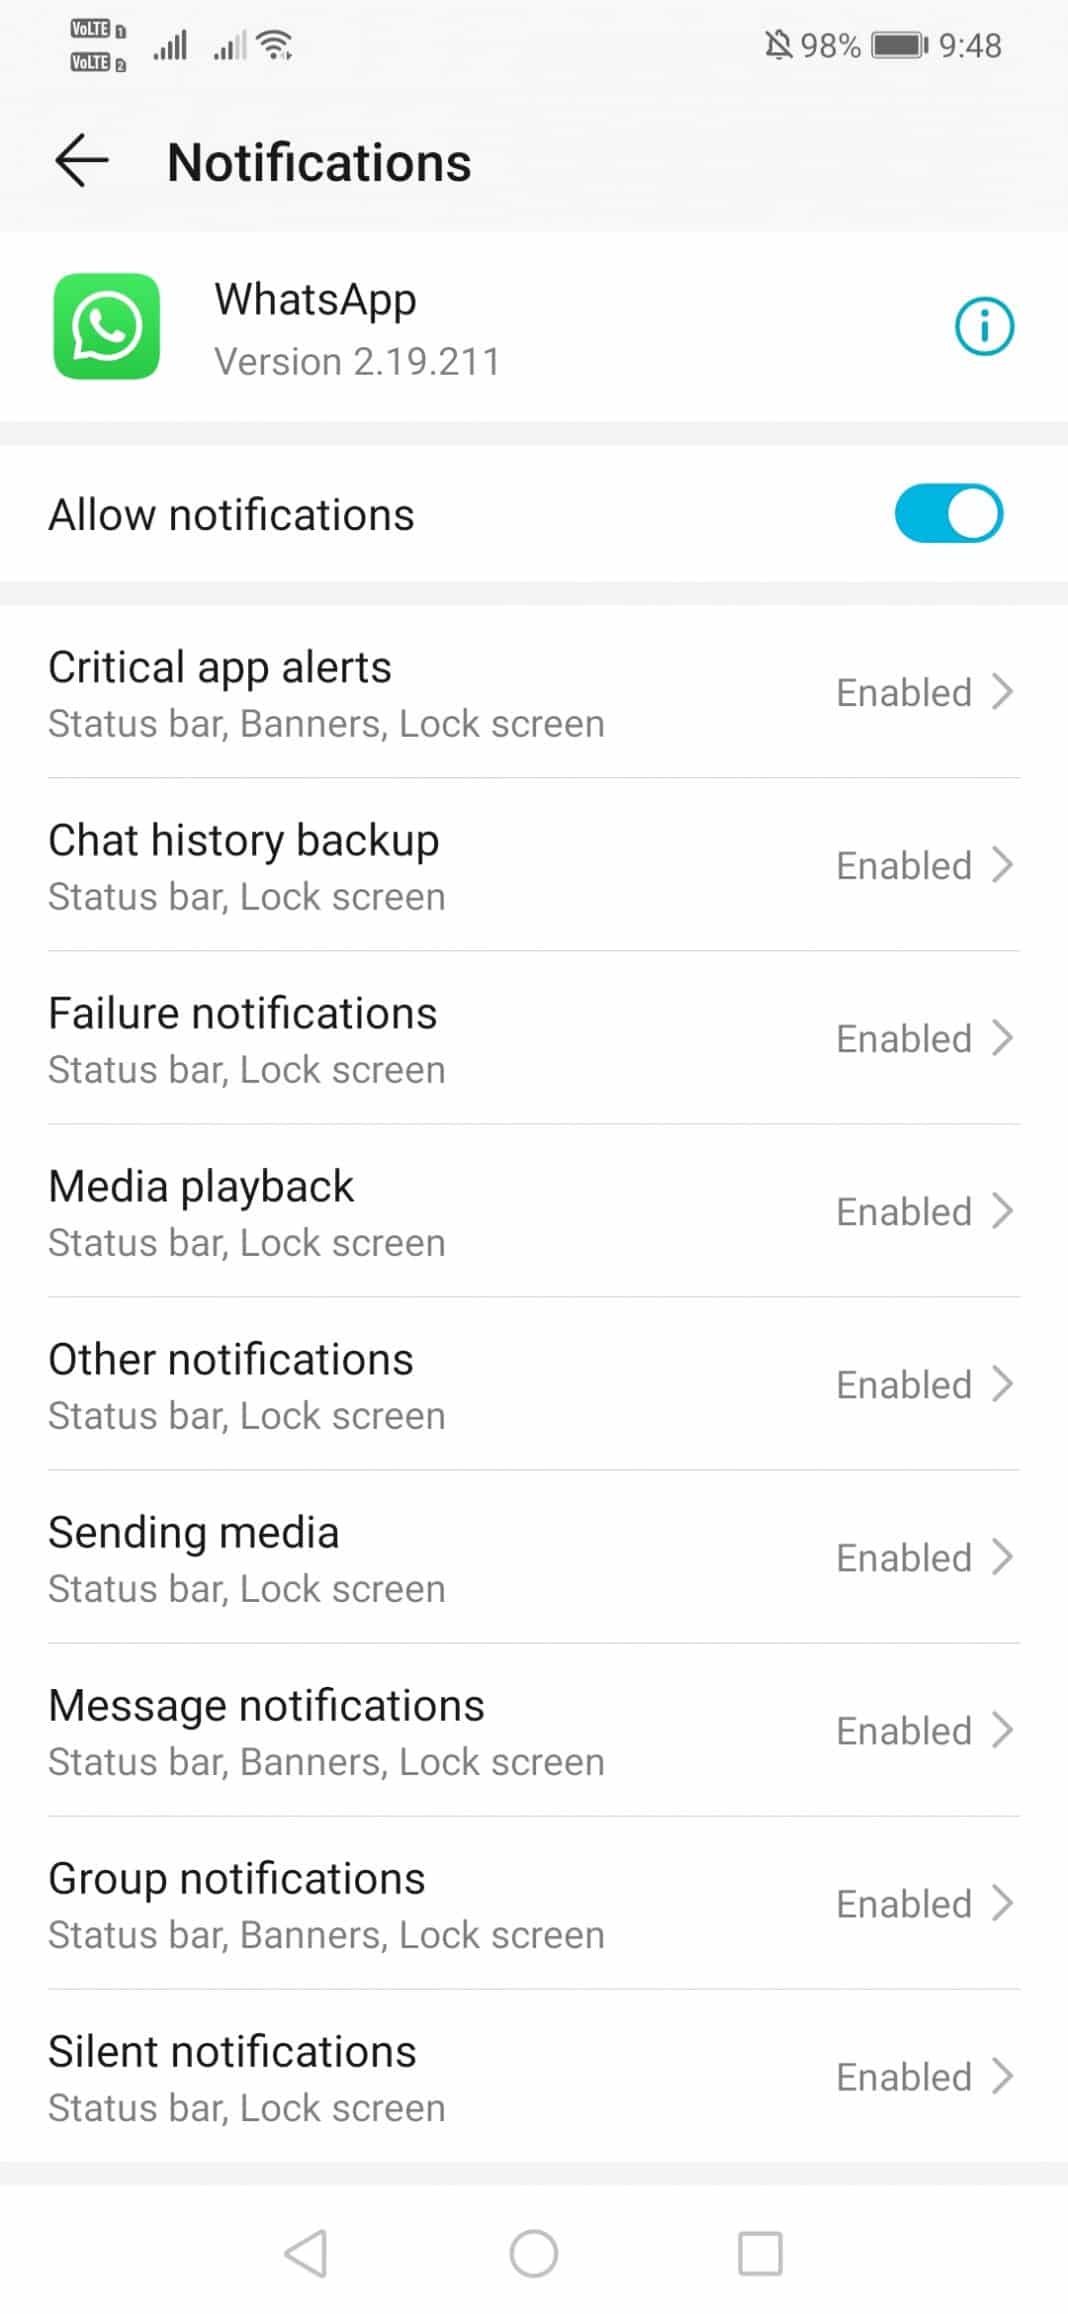 How To Customize WhatsApp Notifications